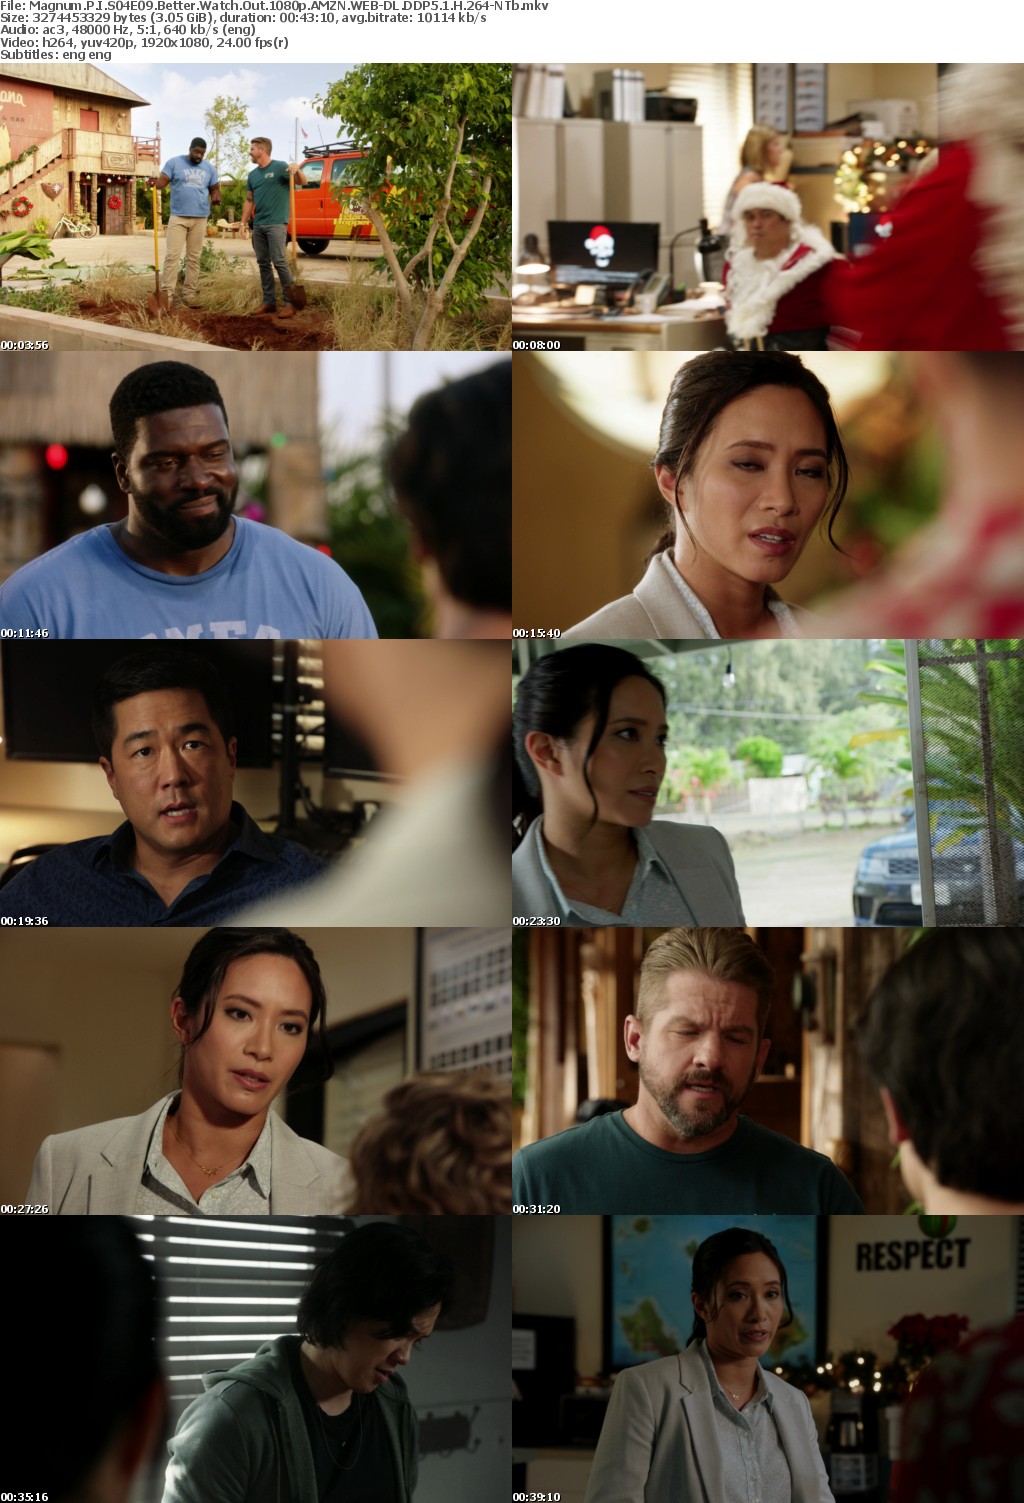 Magnum P I 2018 S04E09 Better Watch Out 1080p AMZN WEBRip DDP5 1 x264-NTb